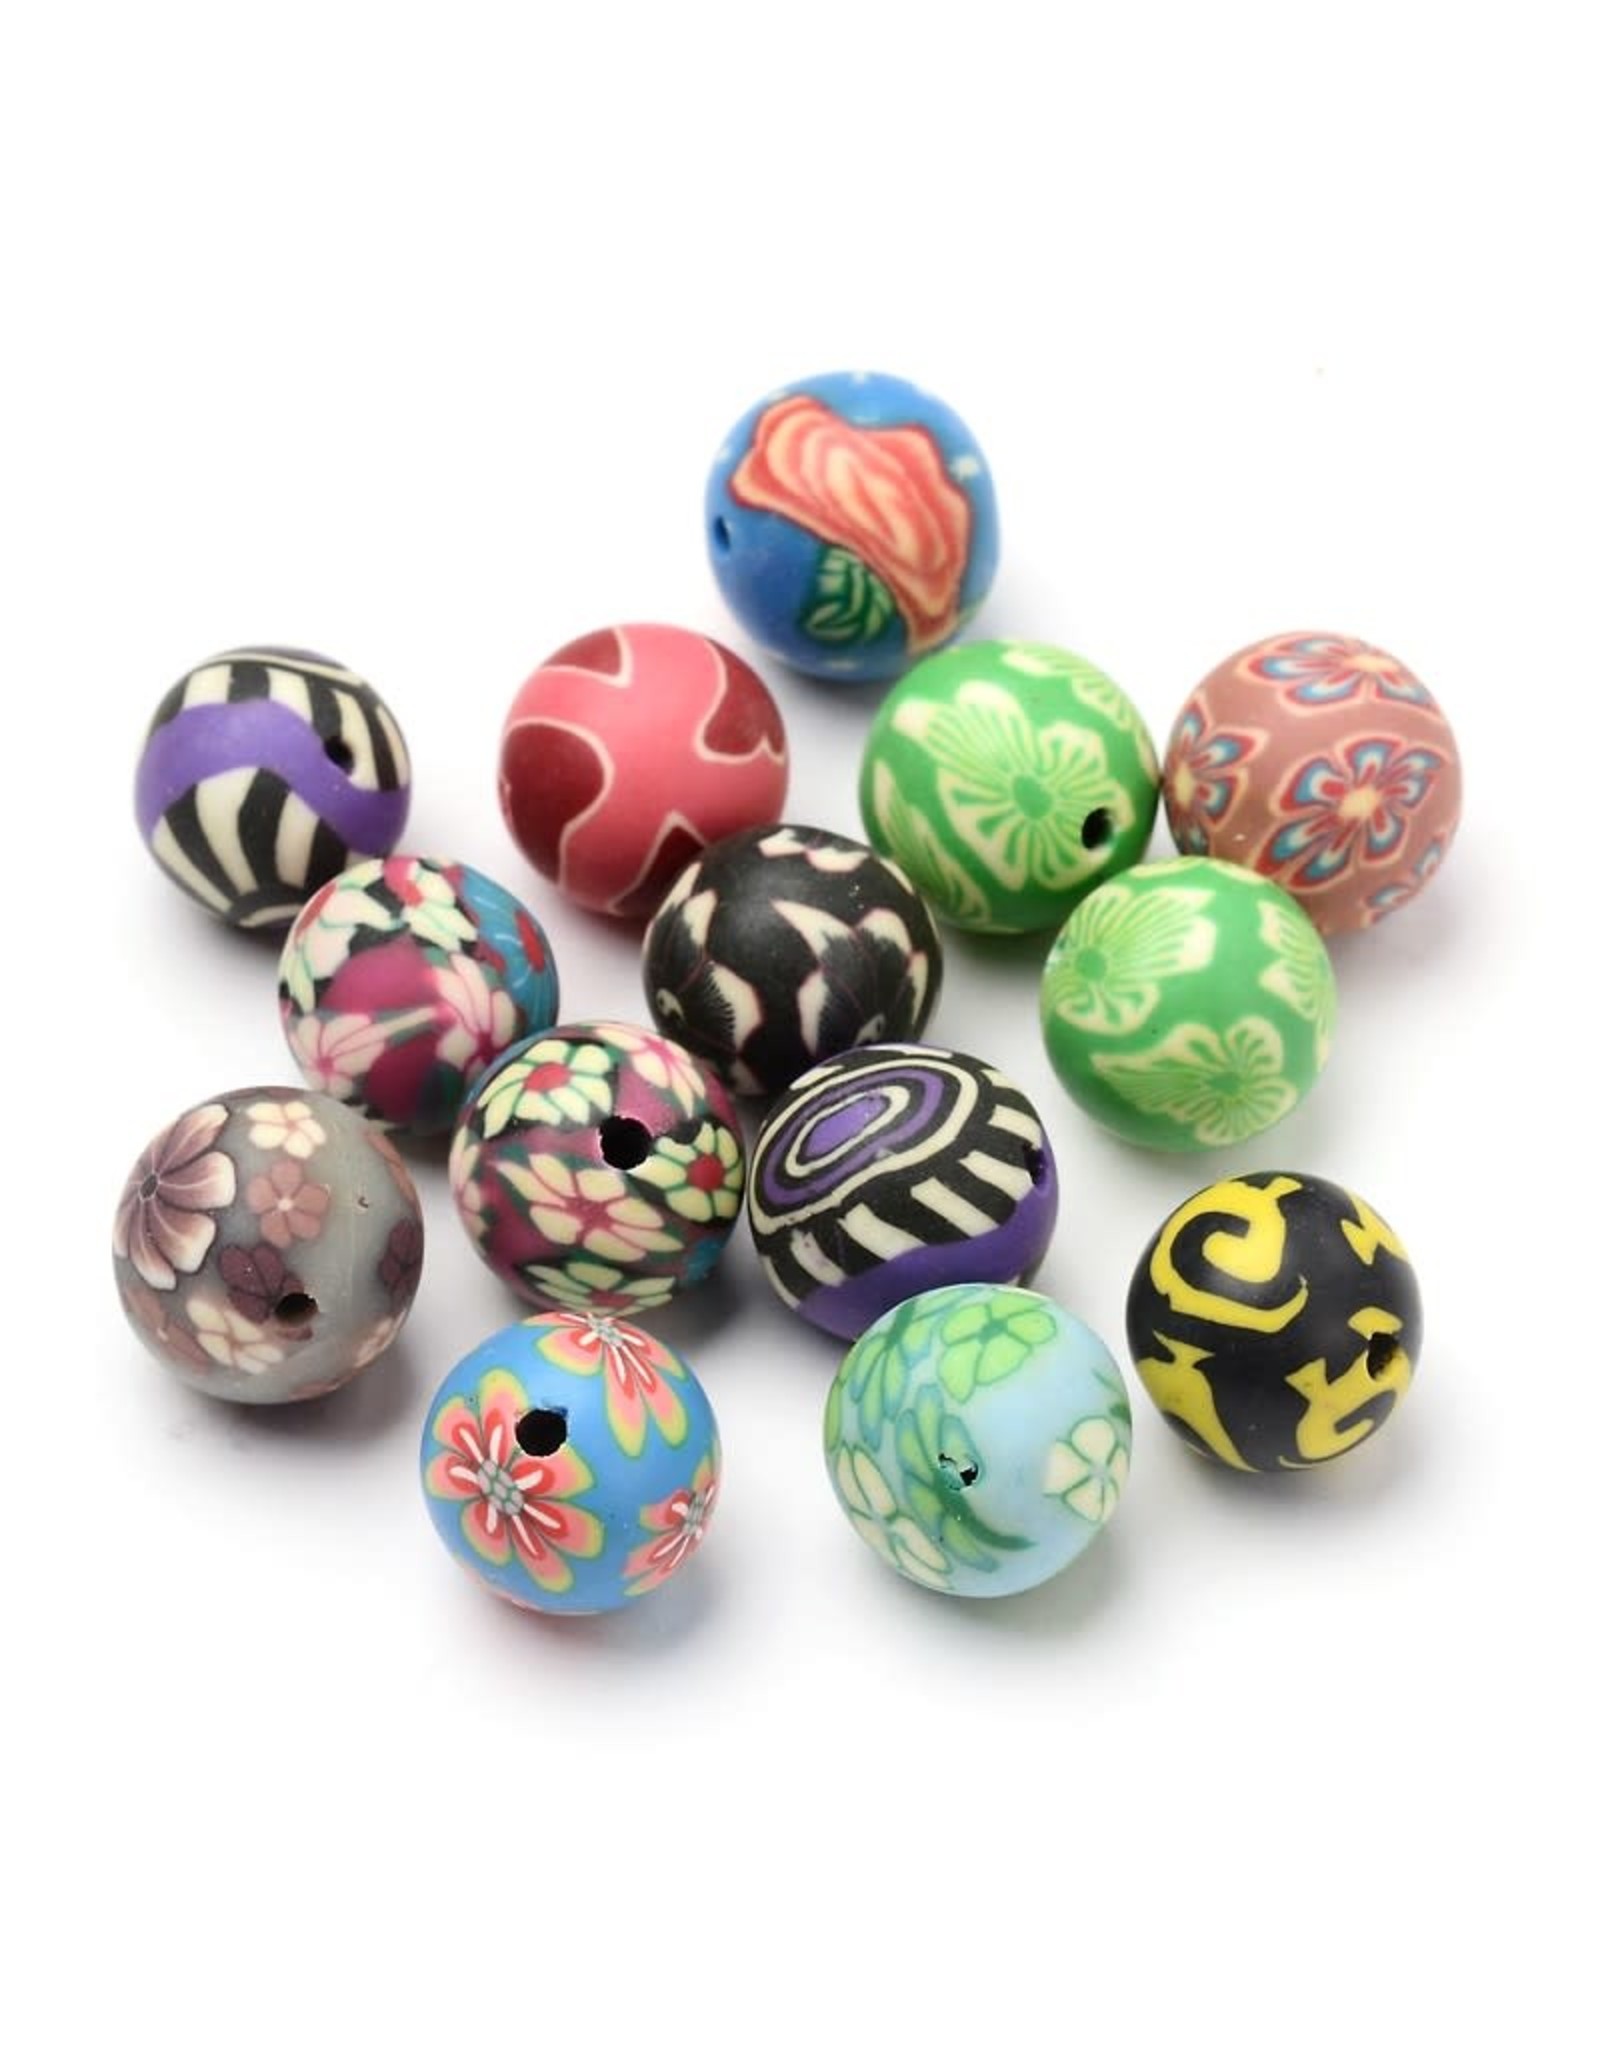 12mm Polymer Clay Assorted  x5 pair